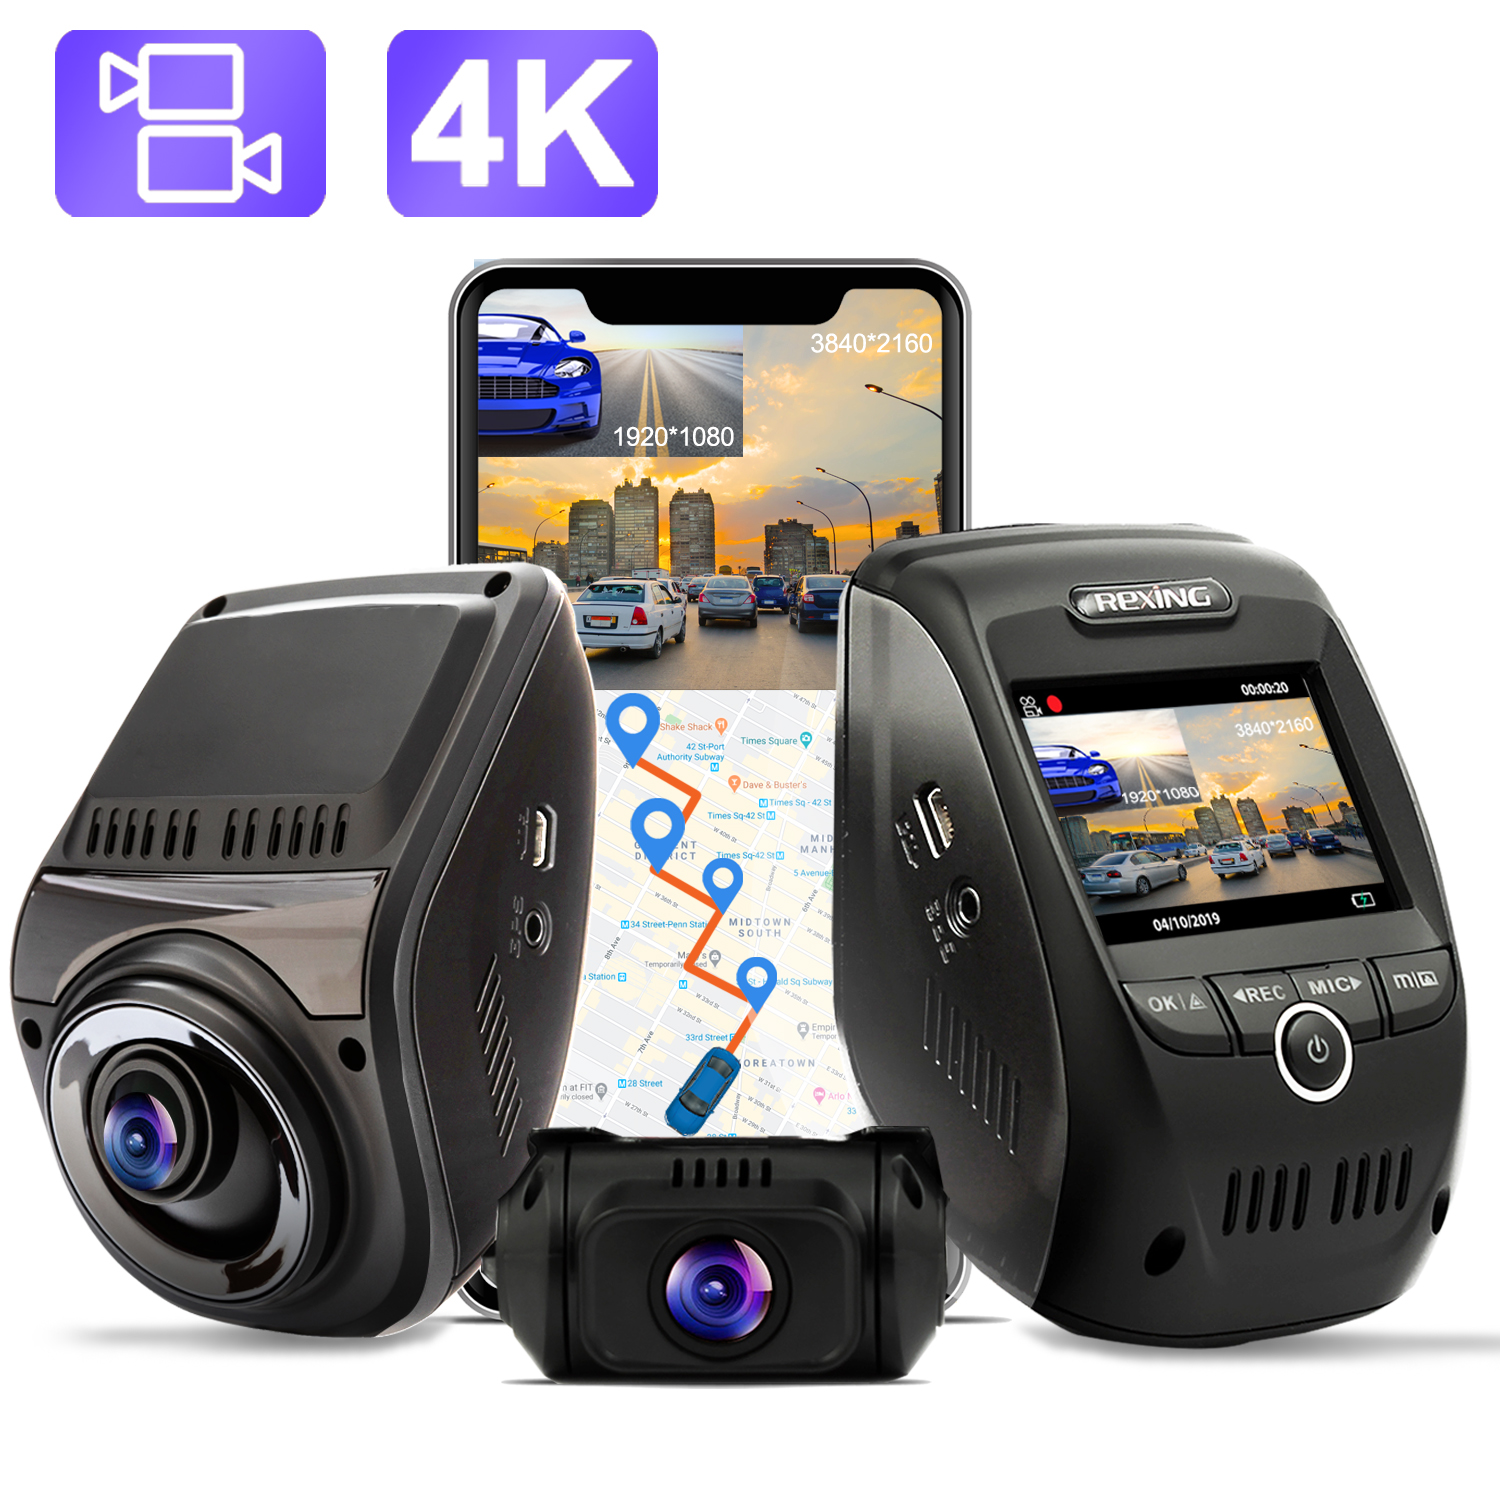 Rexing V1P Max 4K UHD Dual Channel Dash Cam 4K 3840x2160 Front + 1080p Rear with Wi-Fi and GPS